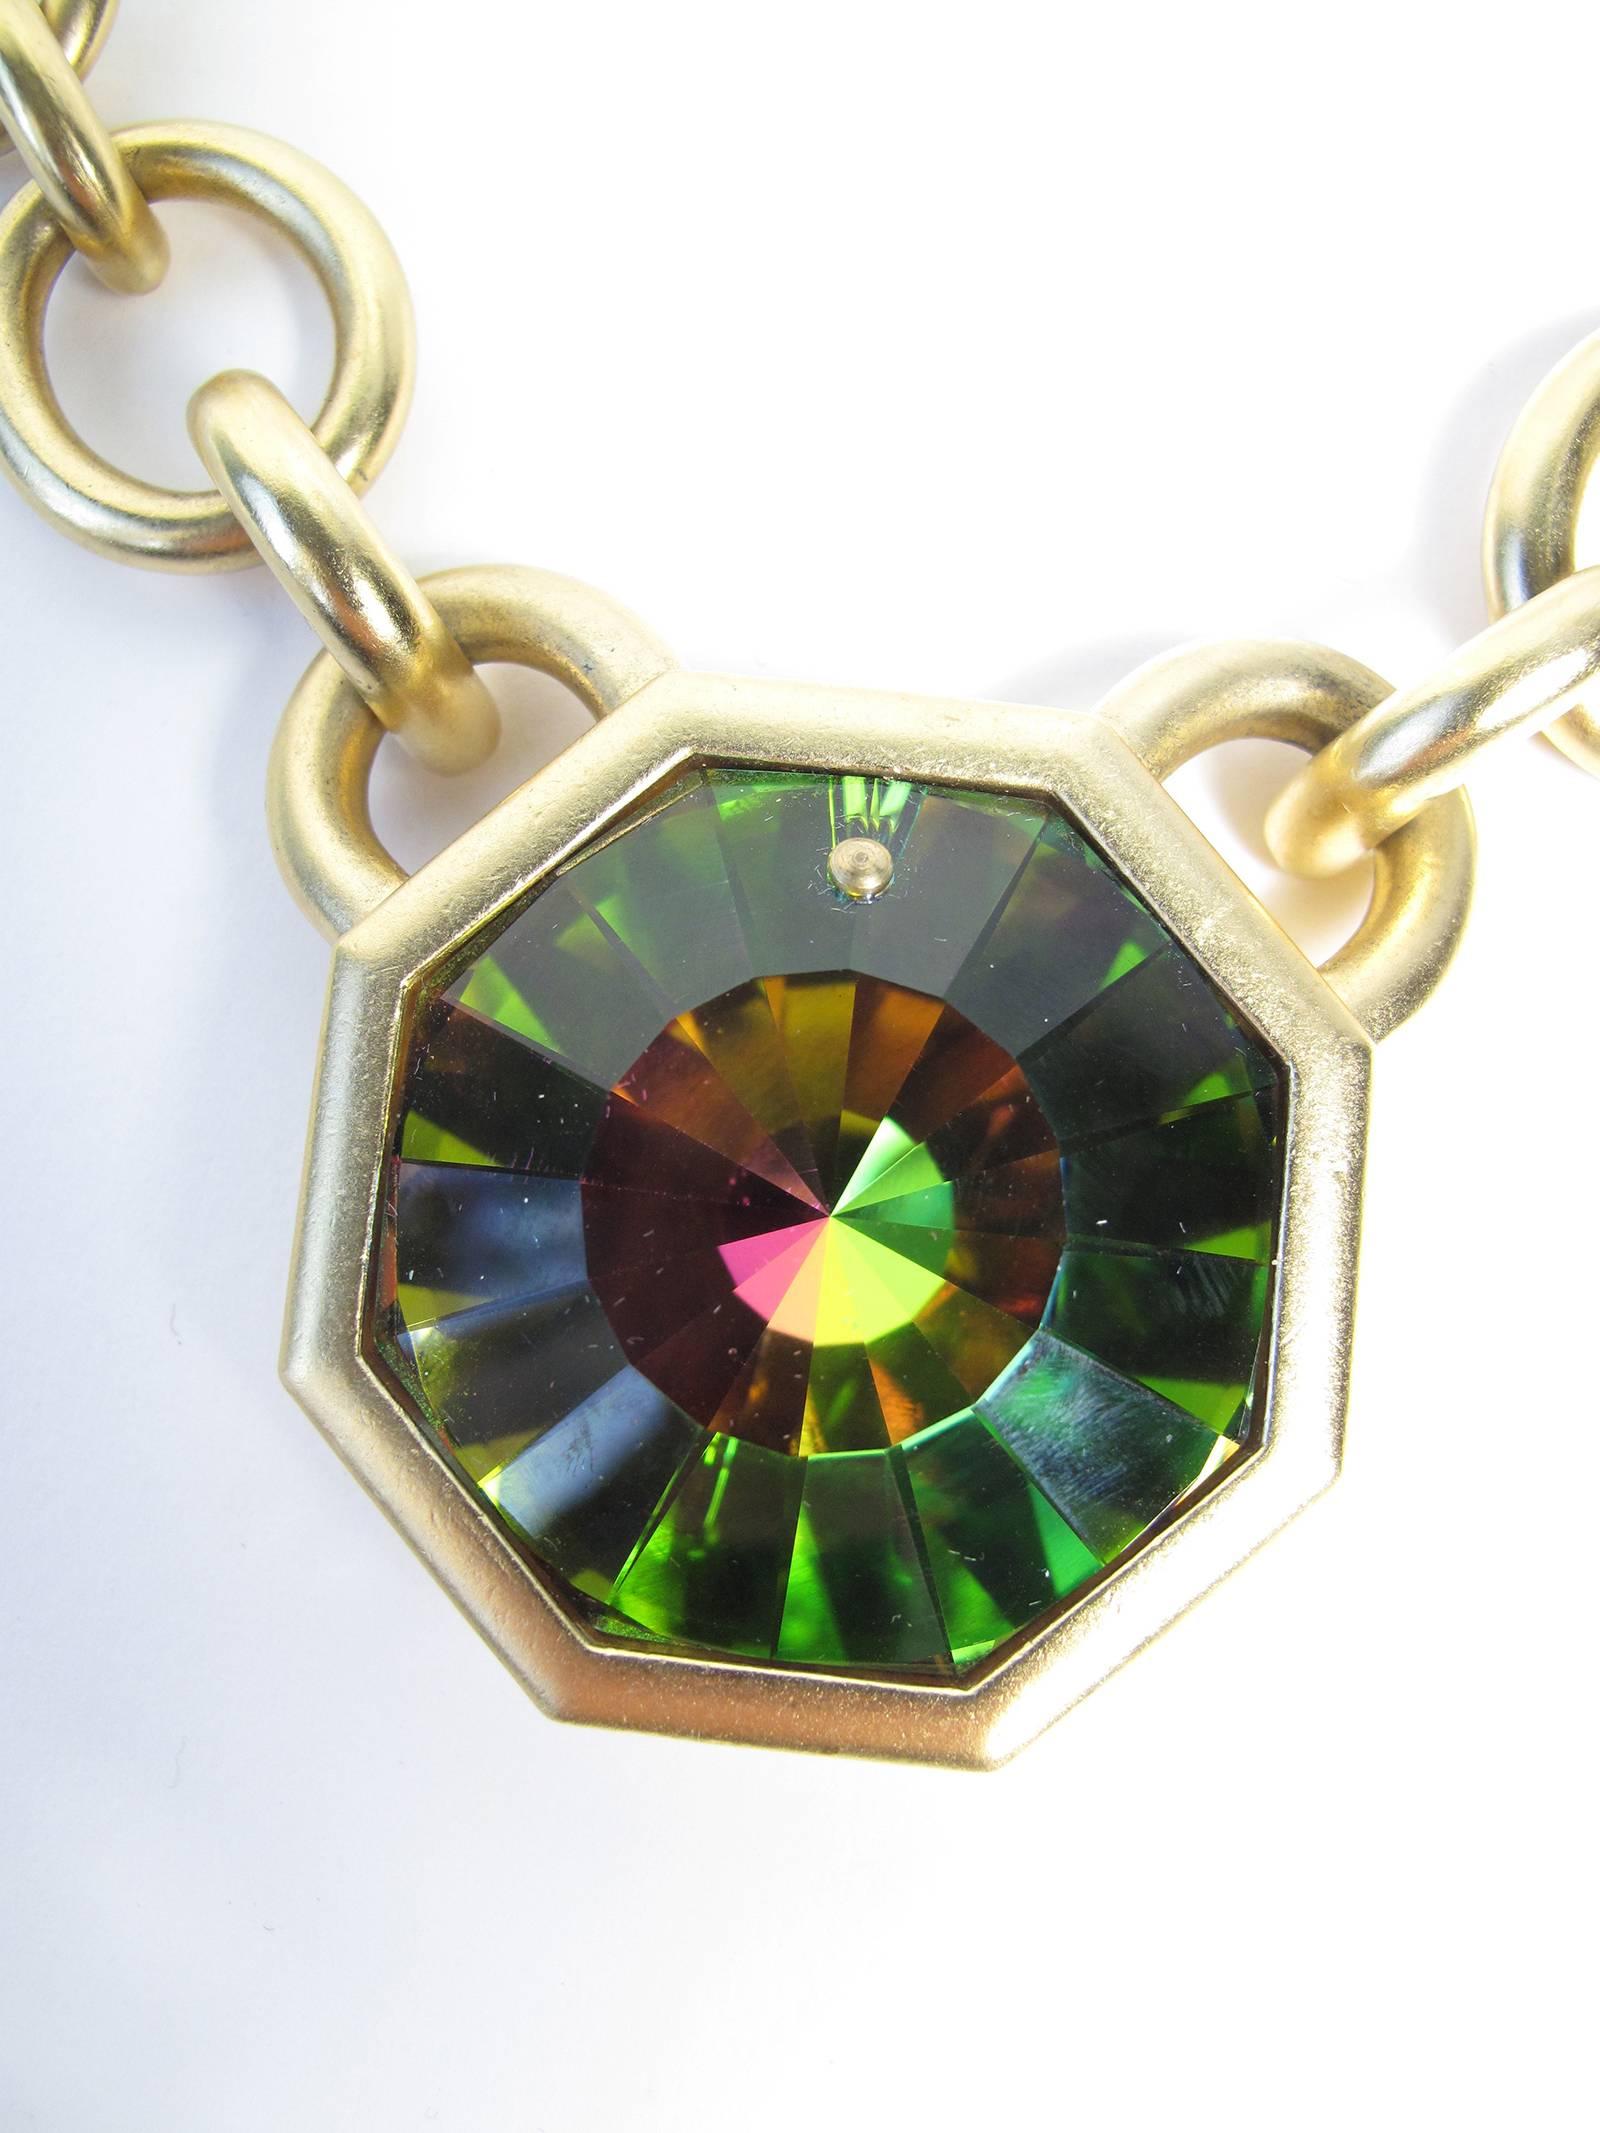 1980s YSL octagon shape crystal with iridescent colors with brushed gold tone necklace and earrings set.   Numbered 295 out of 500 made. Adjustable 13-16 1/2" Long
Large Pendant is 2" x 2"   Condition: Excellent. 

We accept returns